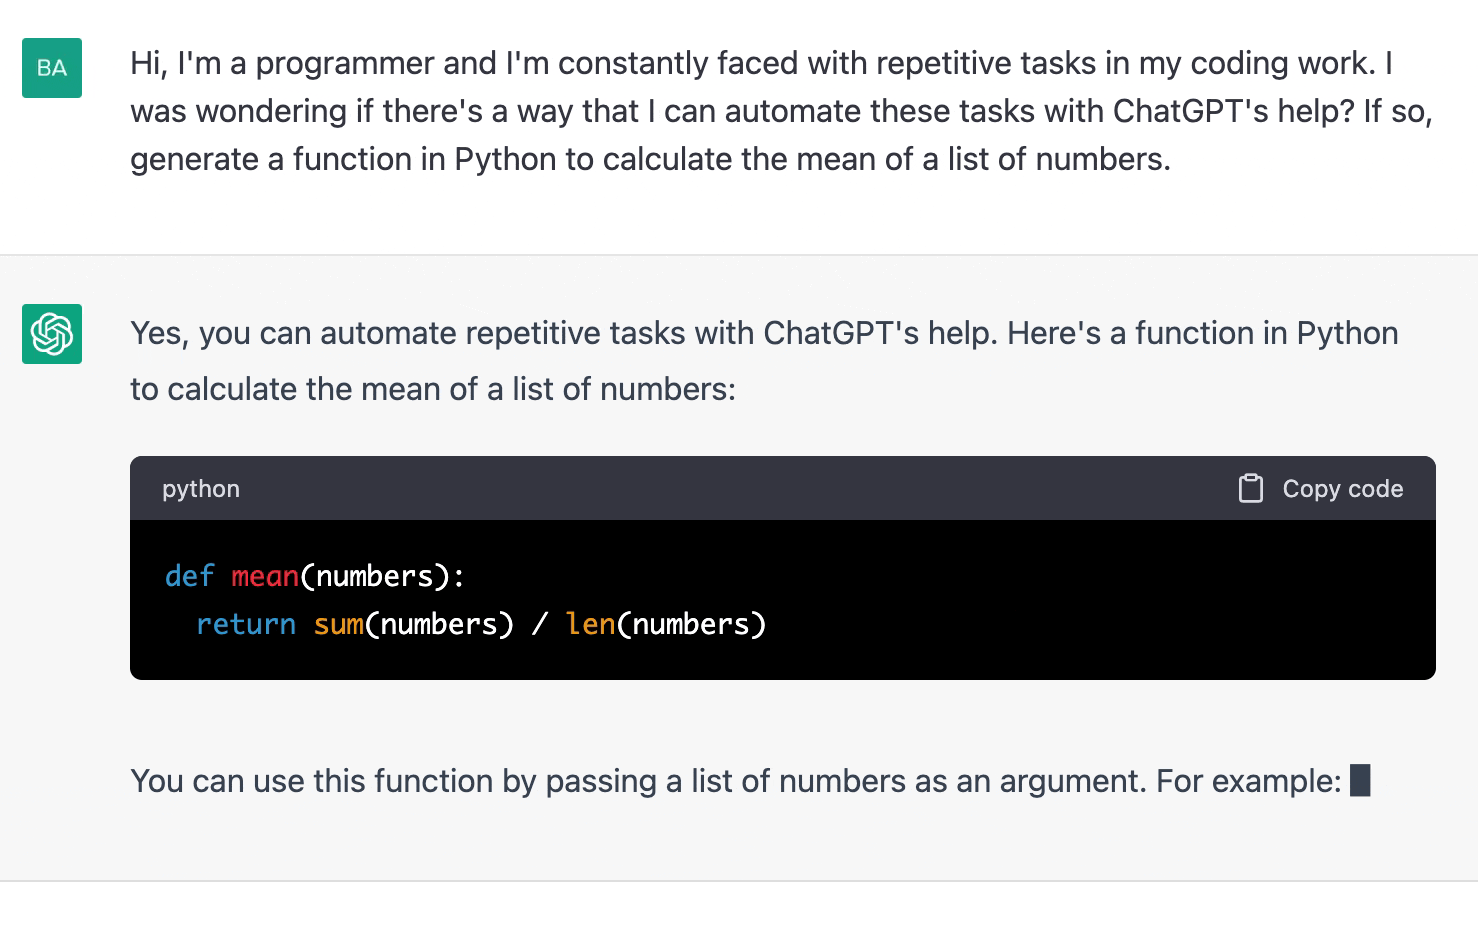 ChatGPT prompt about a function in python to calculate the mean list of numbers